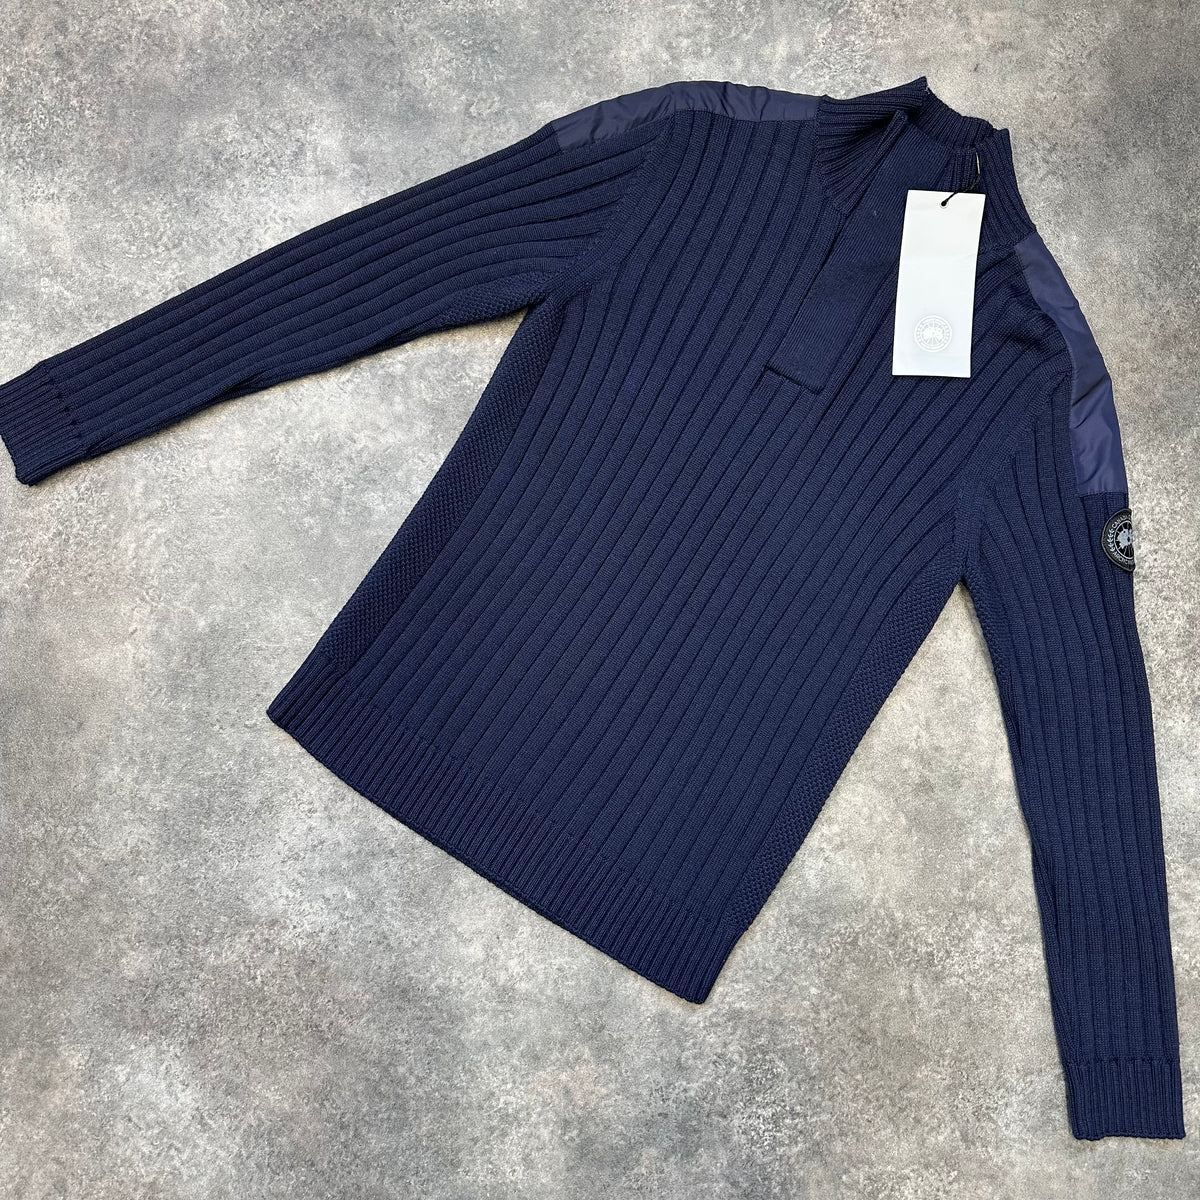 CANADA GOOSE FUNNEL NECK RIBBED SWEATER NAVY BLUE